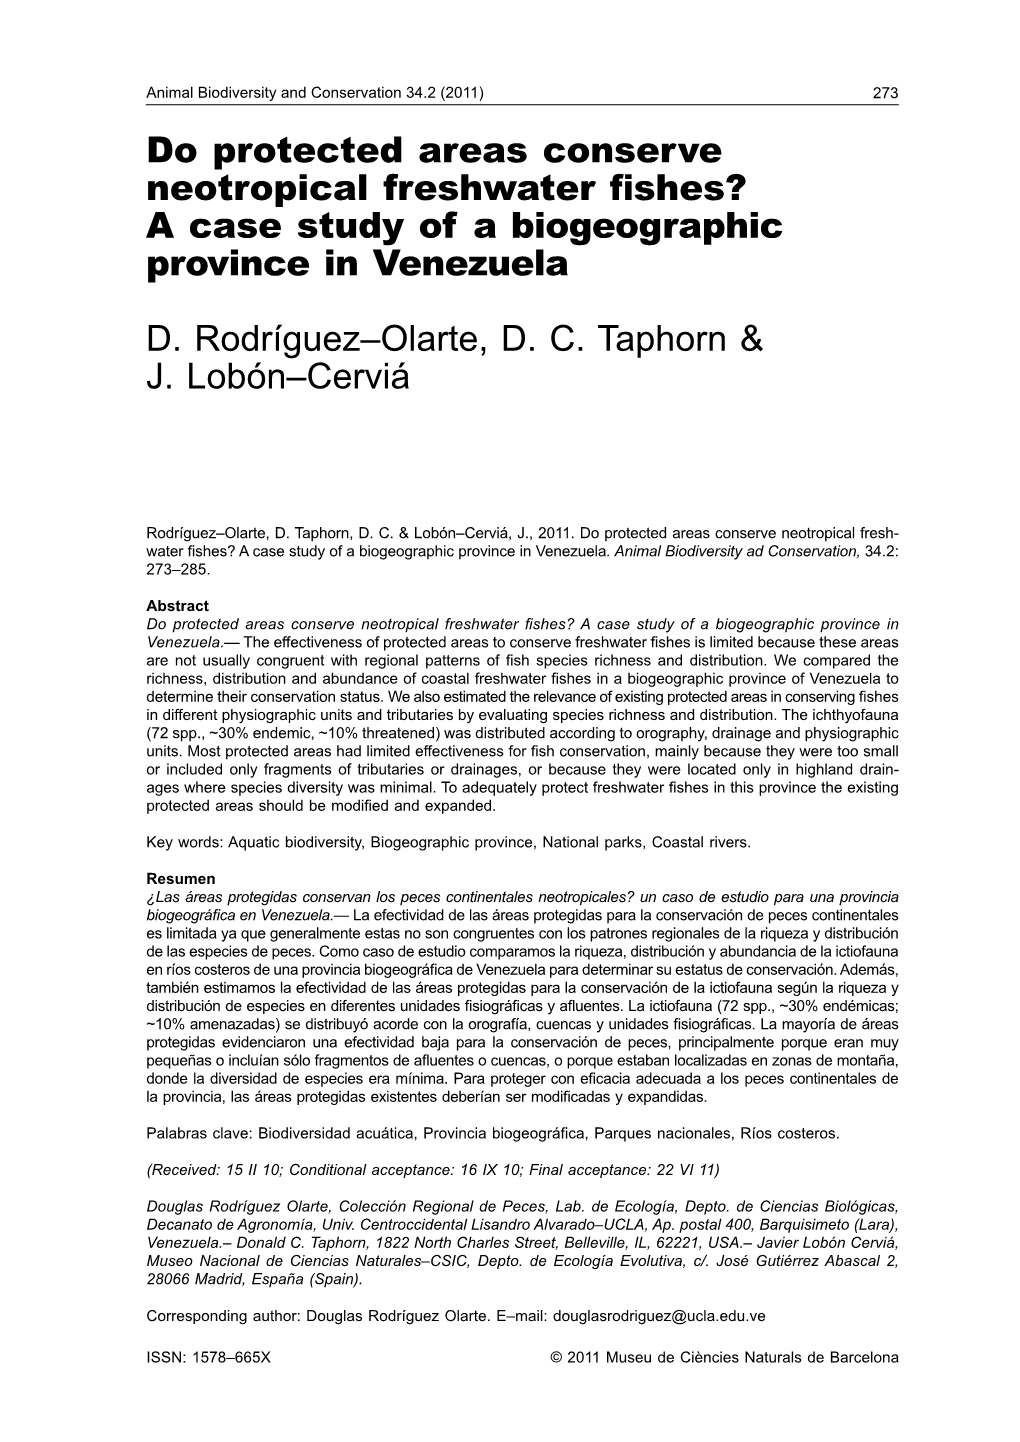 Do Protected Areas Conserve Neotropical Freshwater Fishes? a Case Study of a Biogeographic Province in Venezuela